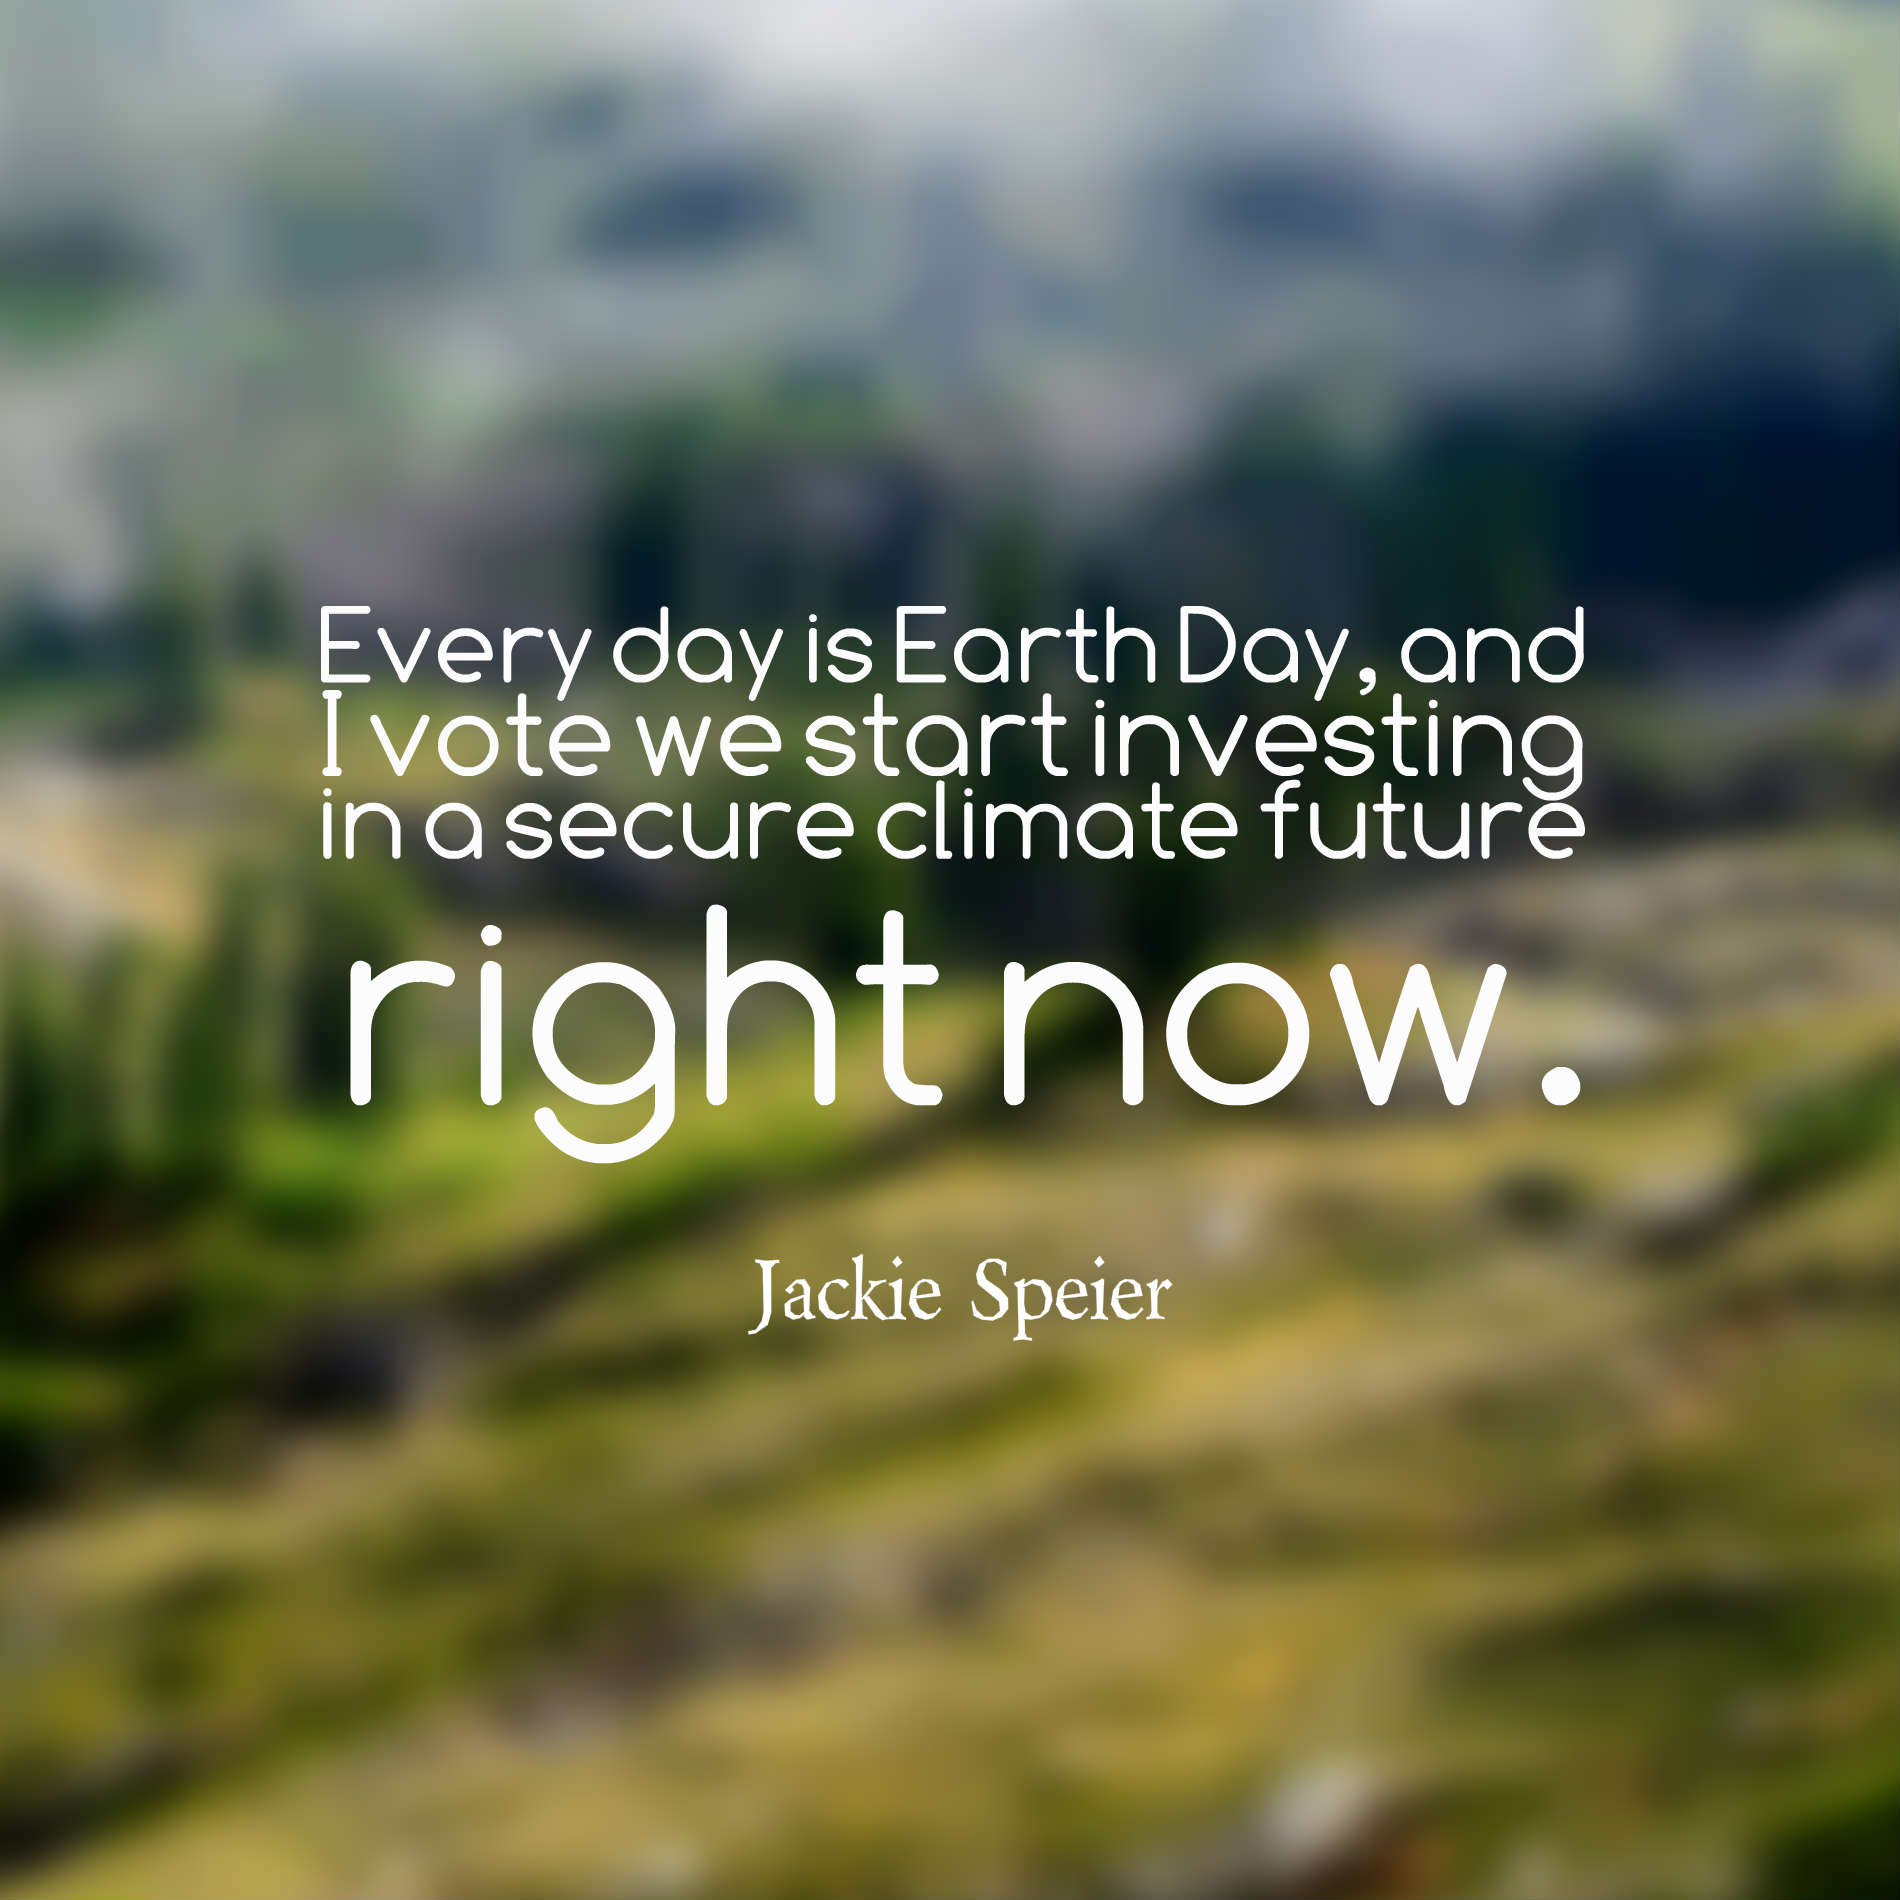 Every day is Earth Day, and I vote we start investing in a secure climate future right now.